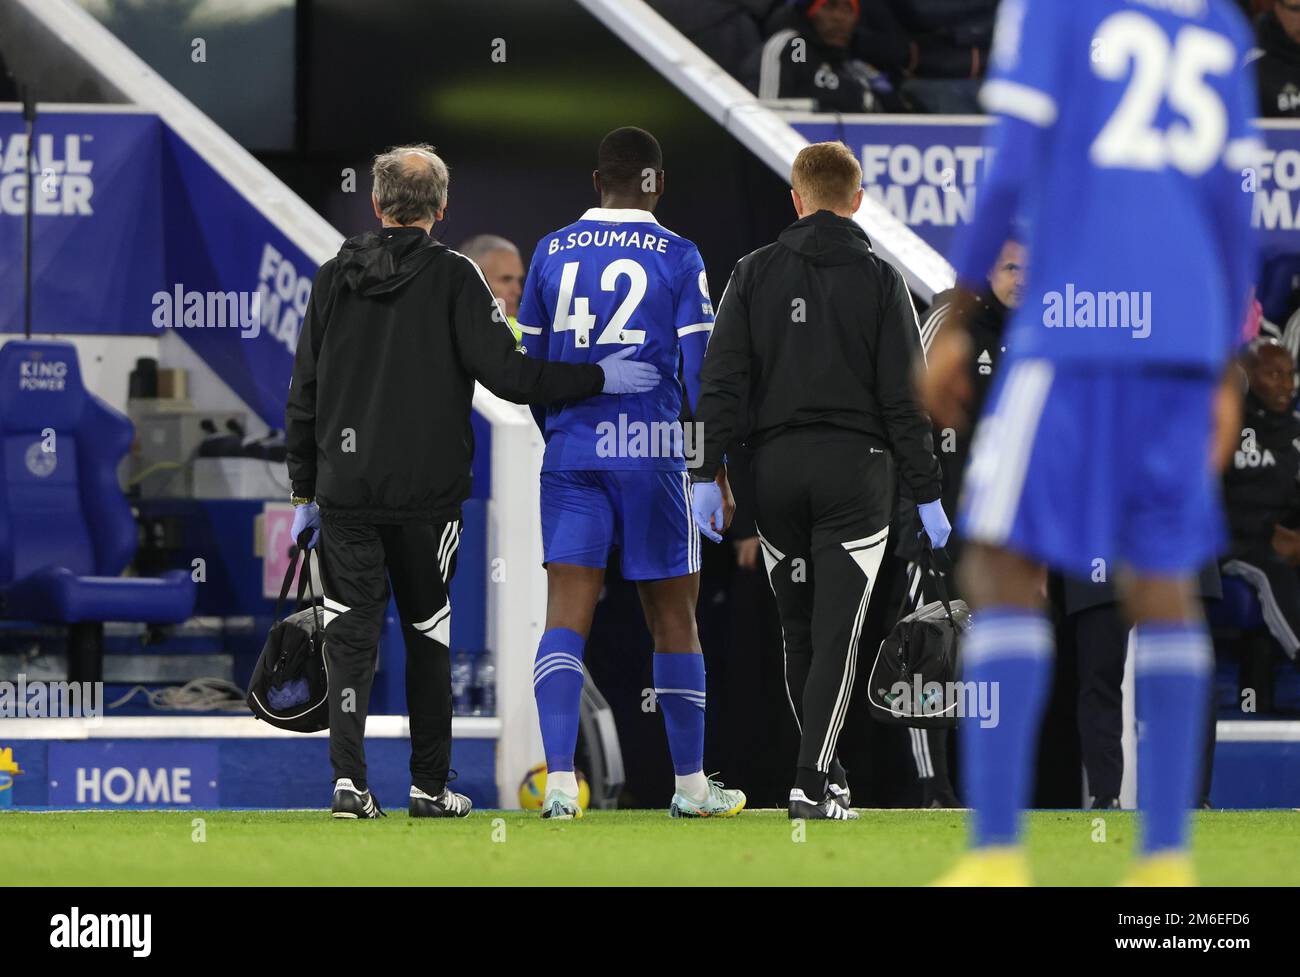 Leicester, UK. 03rd Jan, 2023. Boubakary Soumare (LC) walks off injured at the Leicester City v Fulham EPL Premier League match, at King Power Stadium, Leicester, uk on January 3, 2023. Credit: Paul Marriott/Alamy Live News Stock Photo